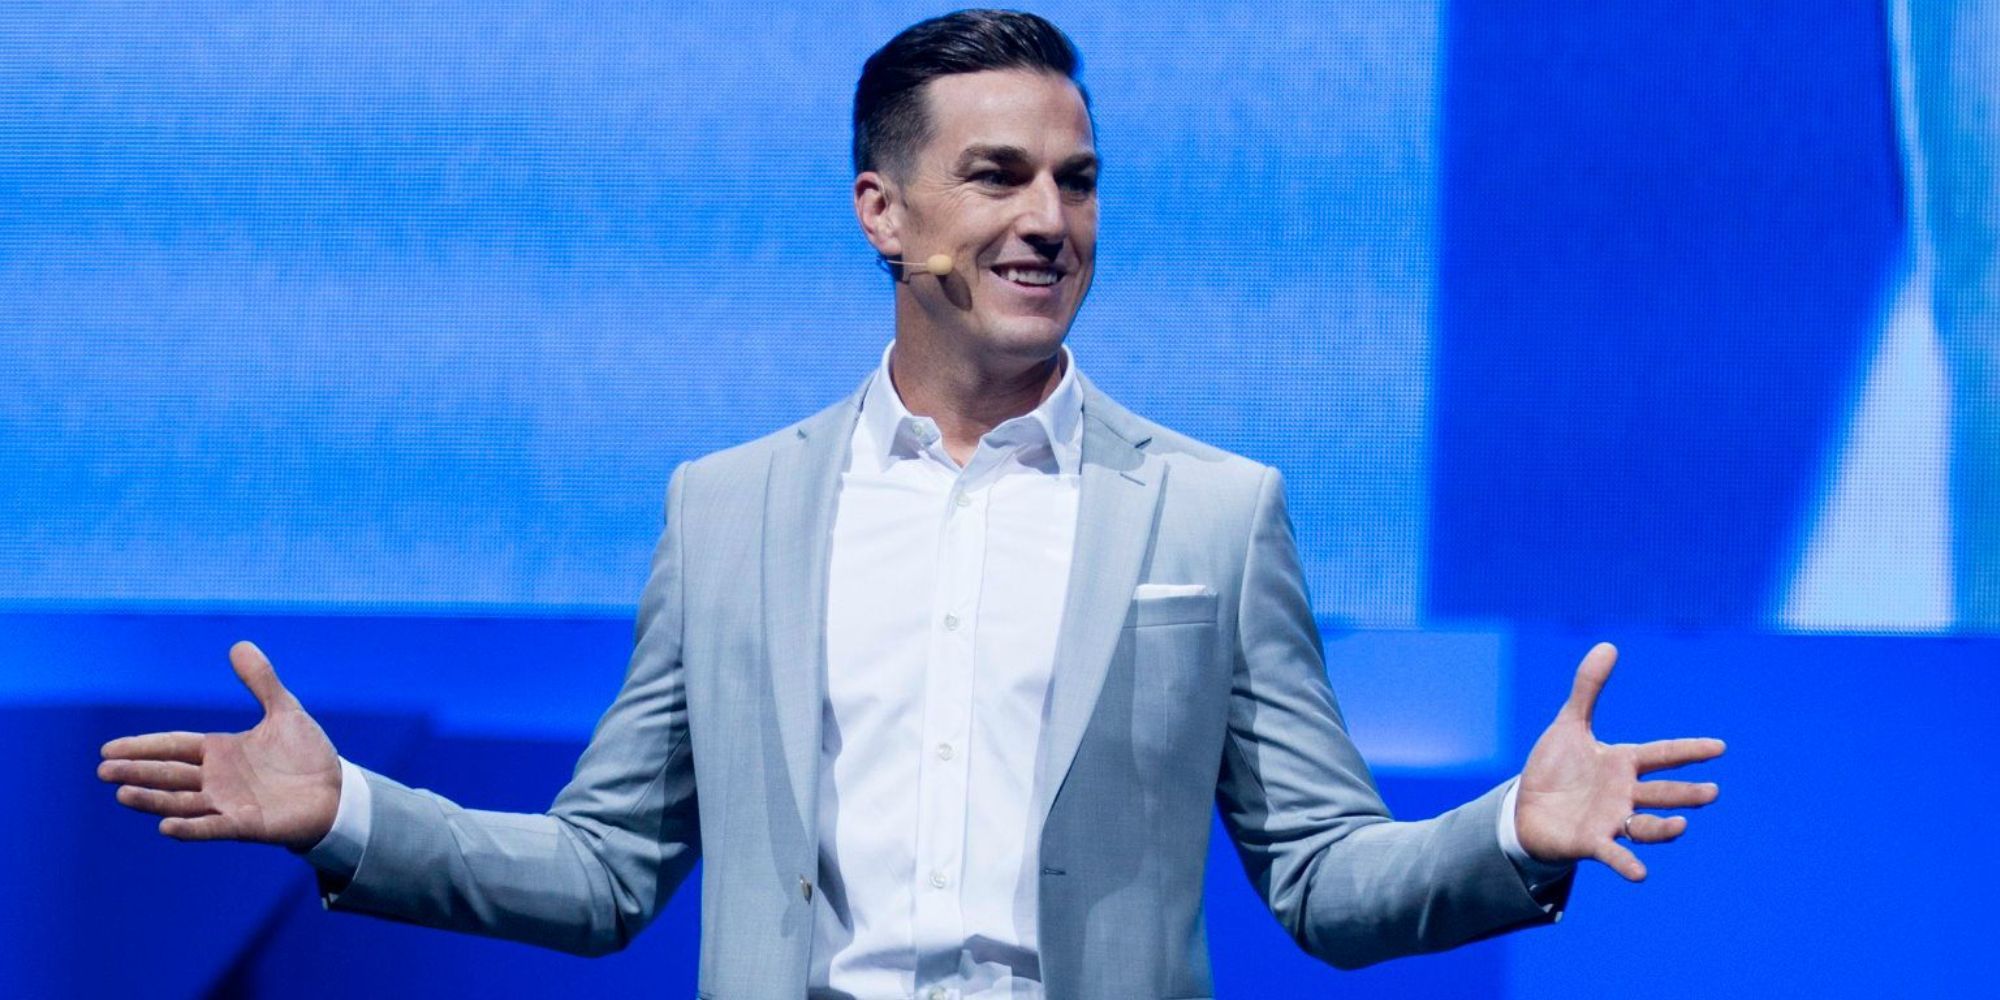 EA CEO Andrew Wilson was getting paid too much, so he's only getting $20 million this year